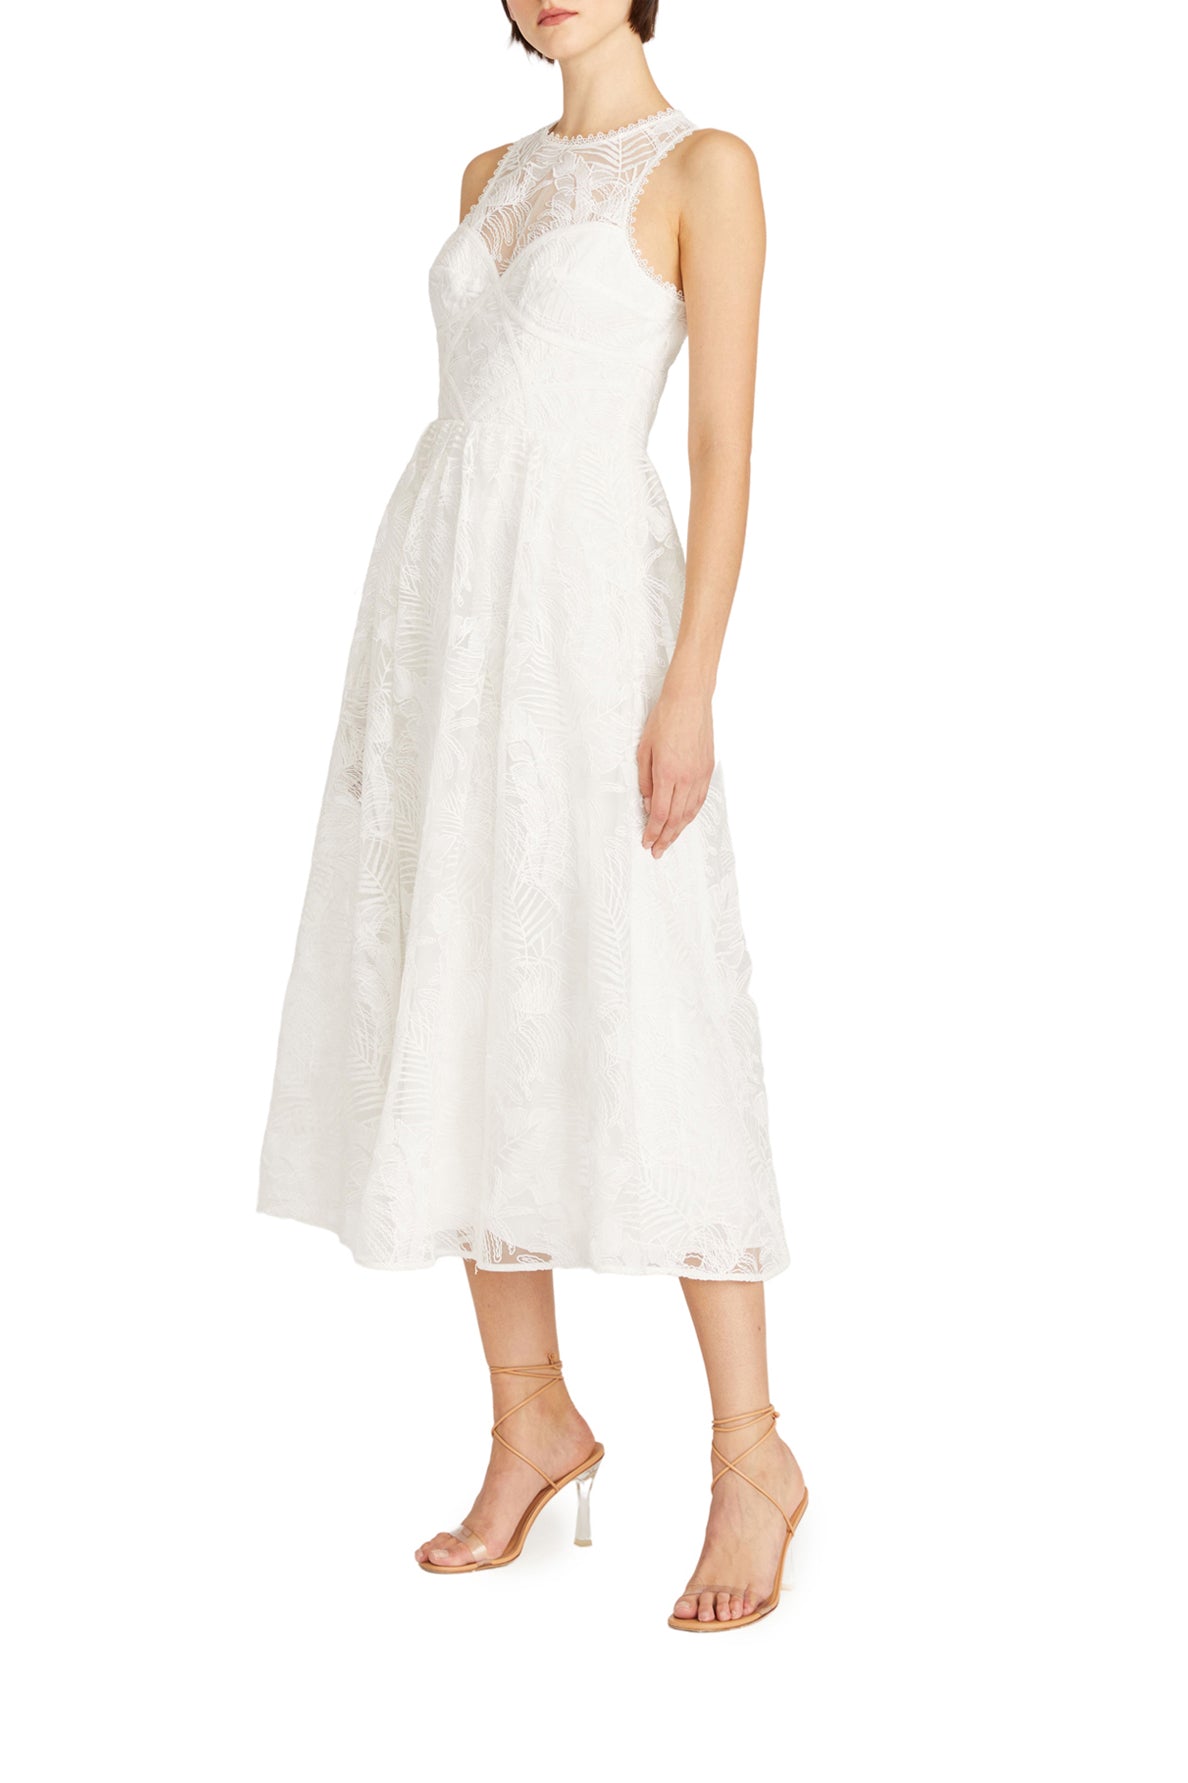 ML Monique Lhuillier ivory embroidered tulle midi dress.  